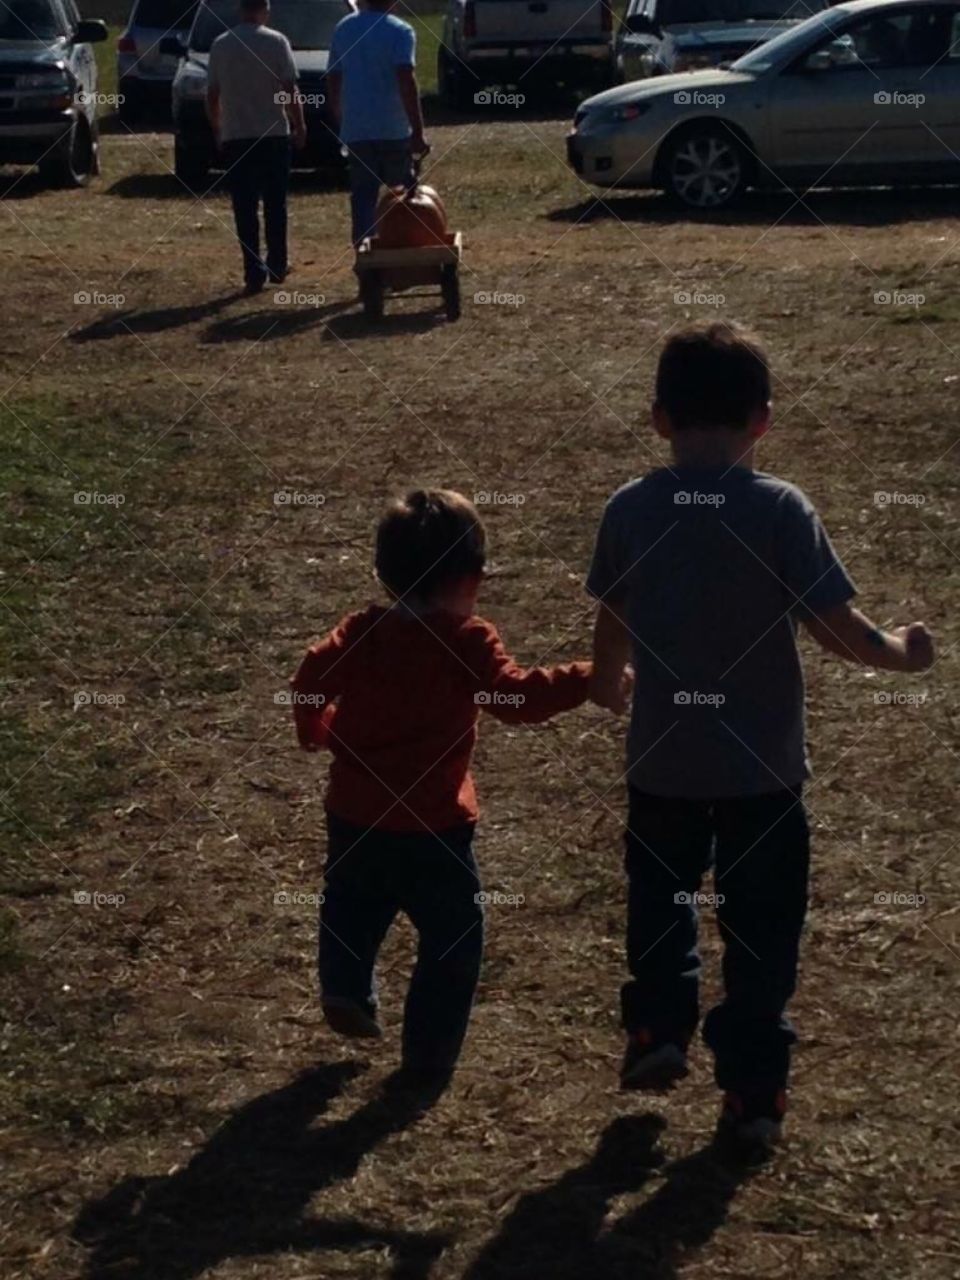 Taking a Walk With My Brother At The Pumpkin Patch